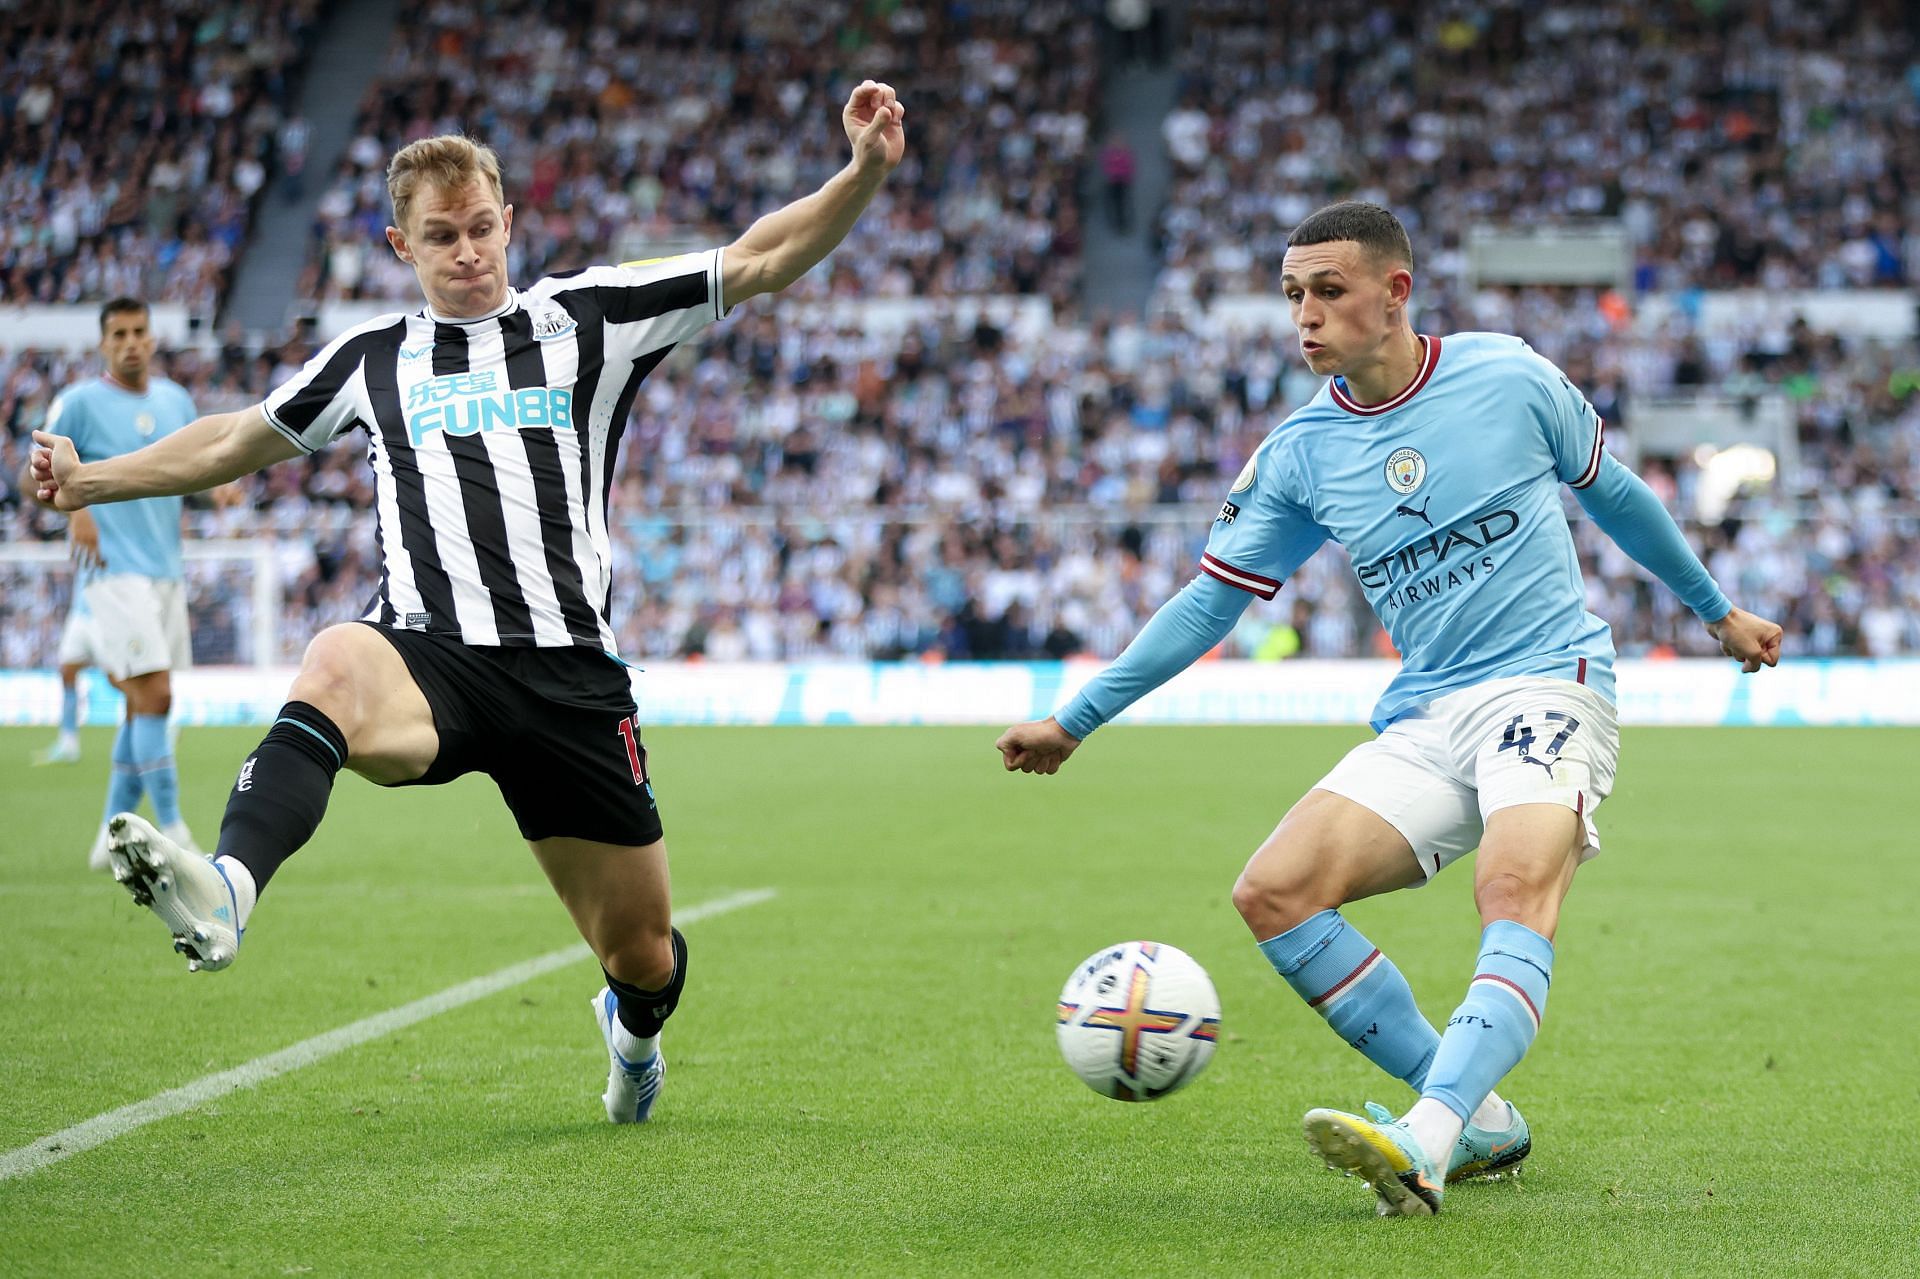 Newcastle United and Manchester City shared the spoils following a 3-3 draw.